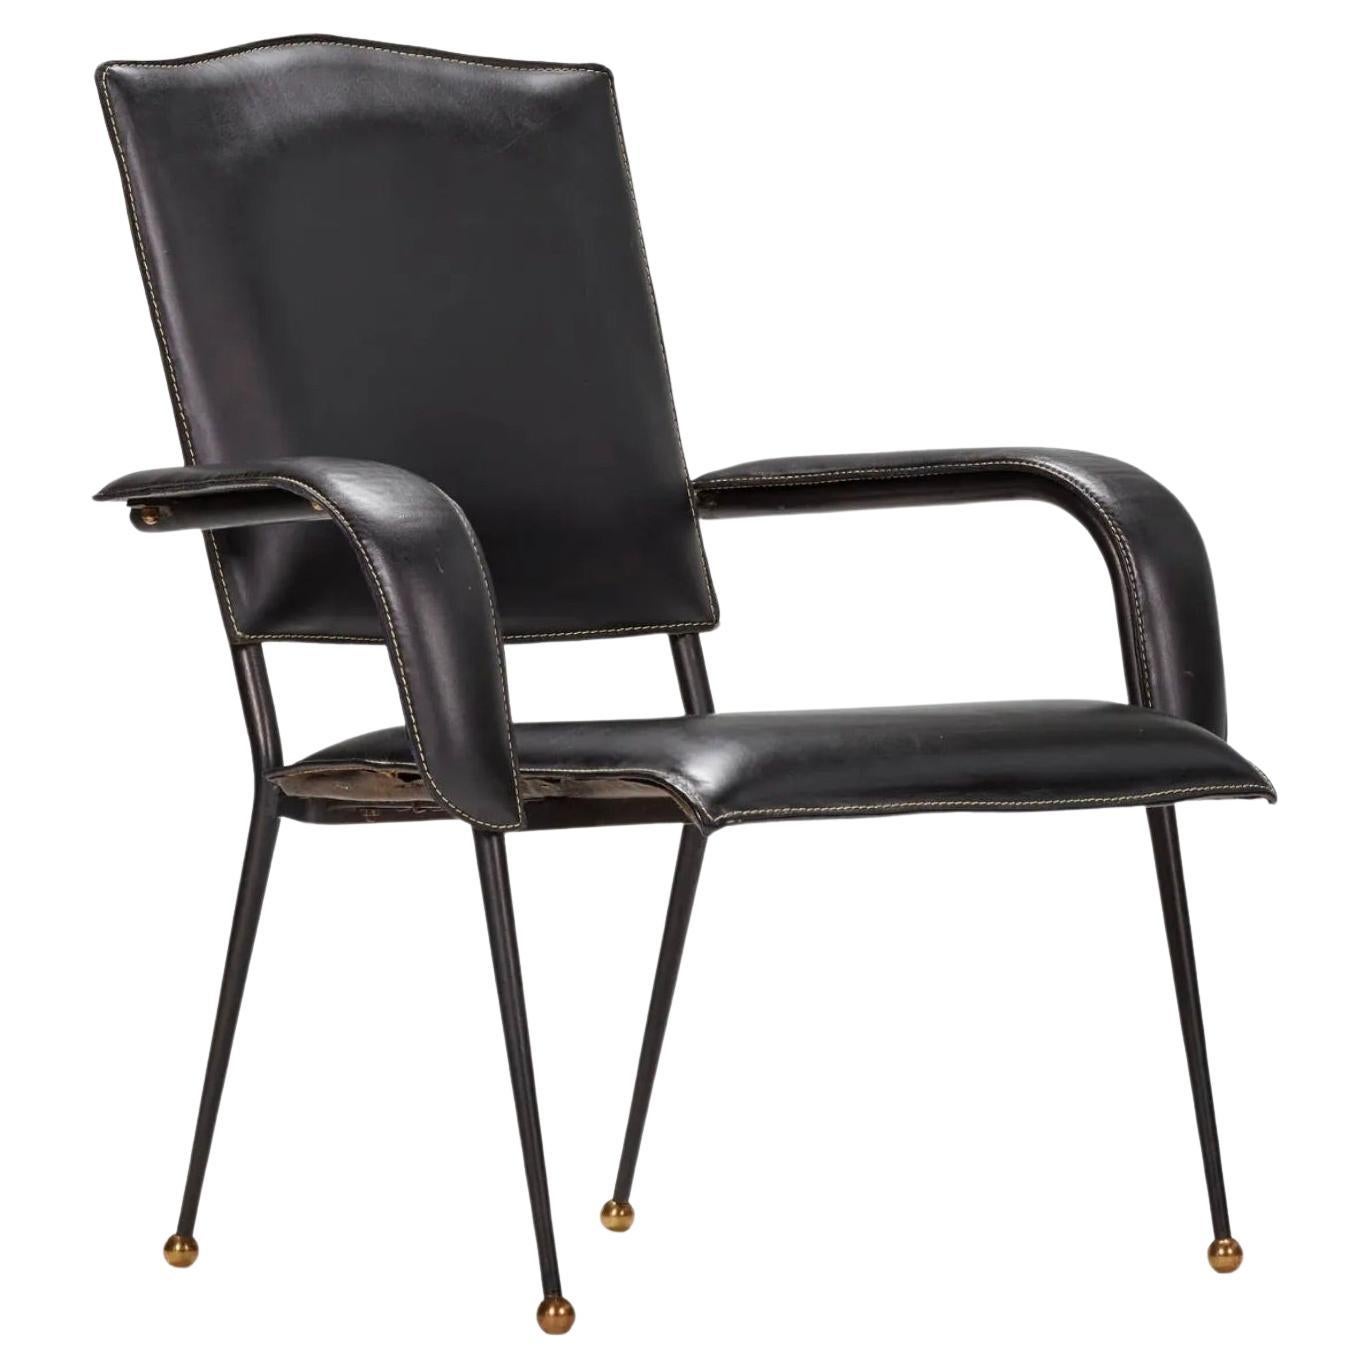 Jacques Adnet Black Leather Armchair, 1950s France For Sale